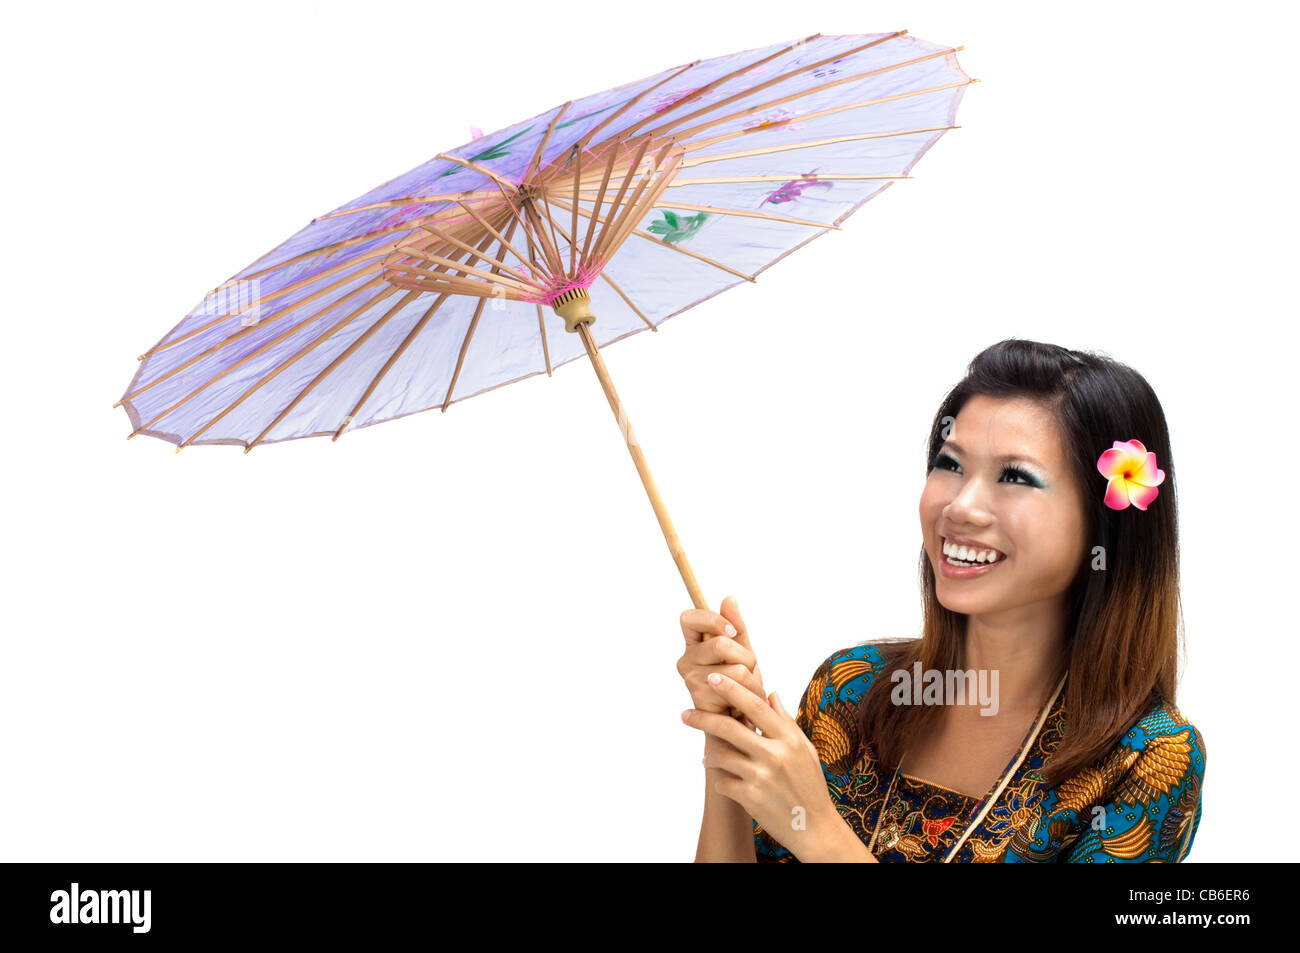 Portrait of a woman with kebaya with umbrella on white background Stock Photo